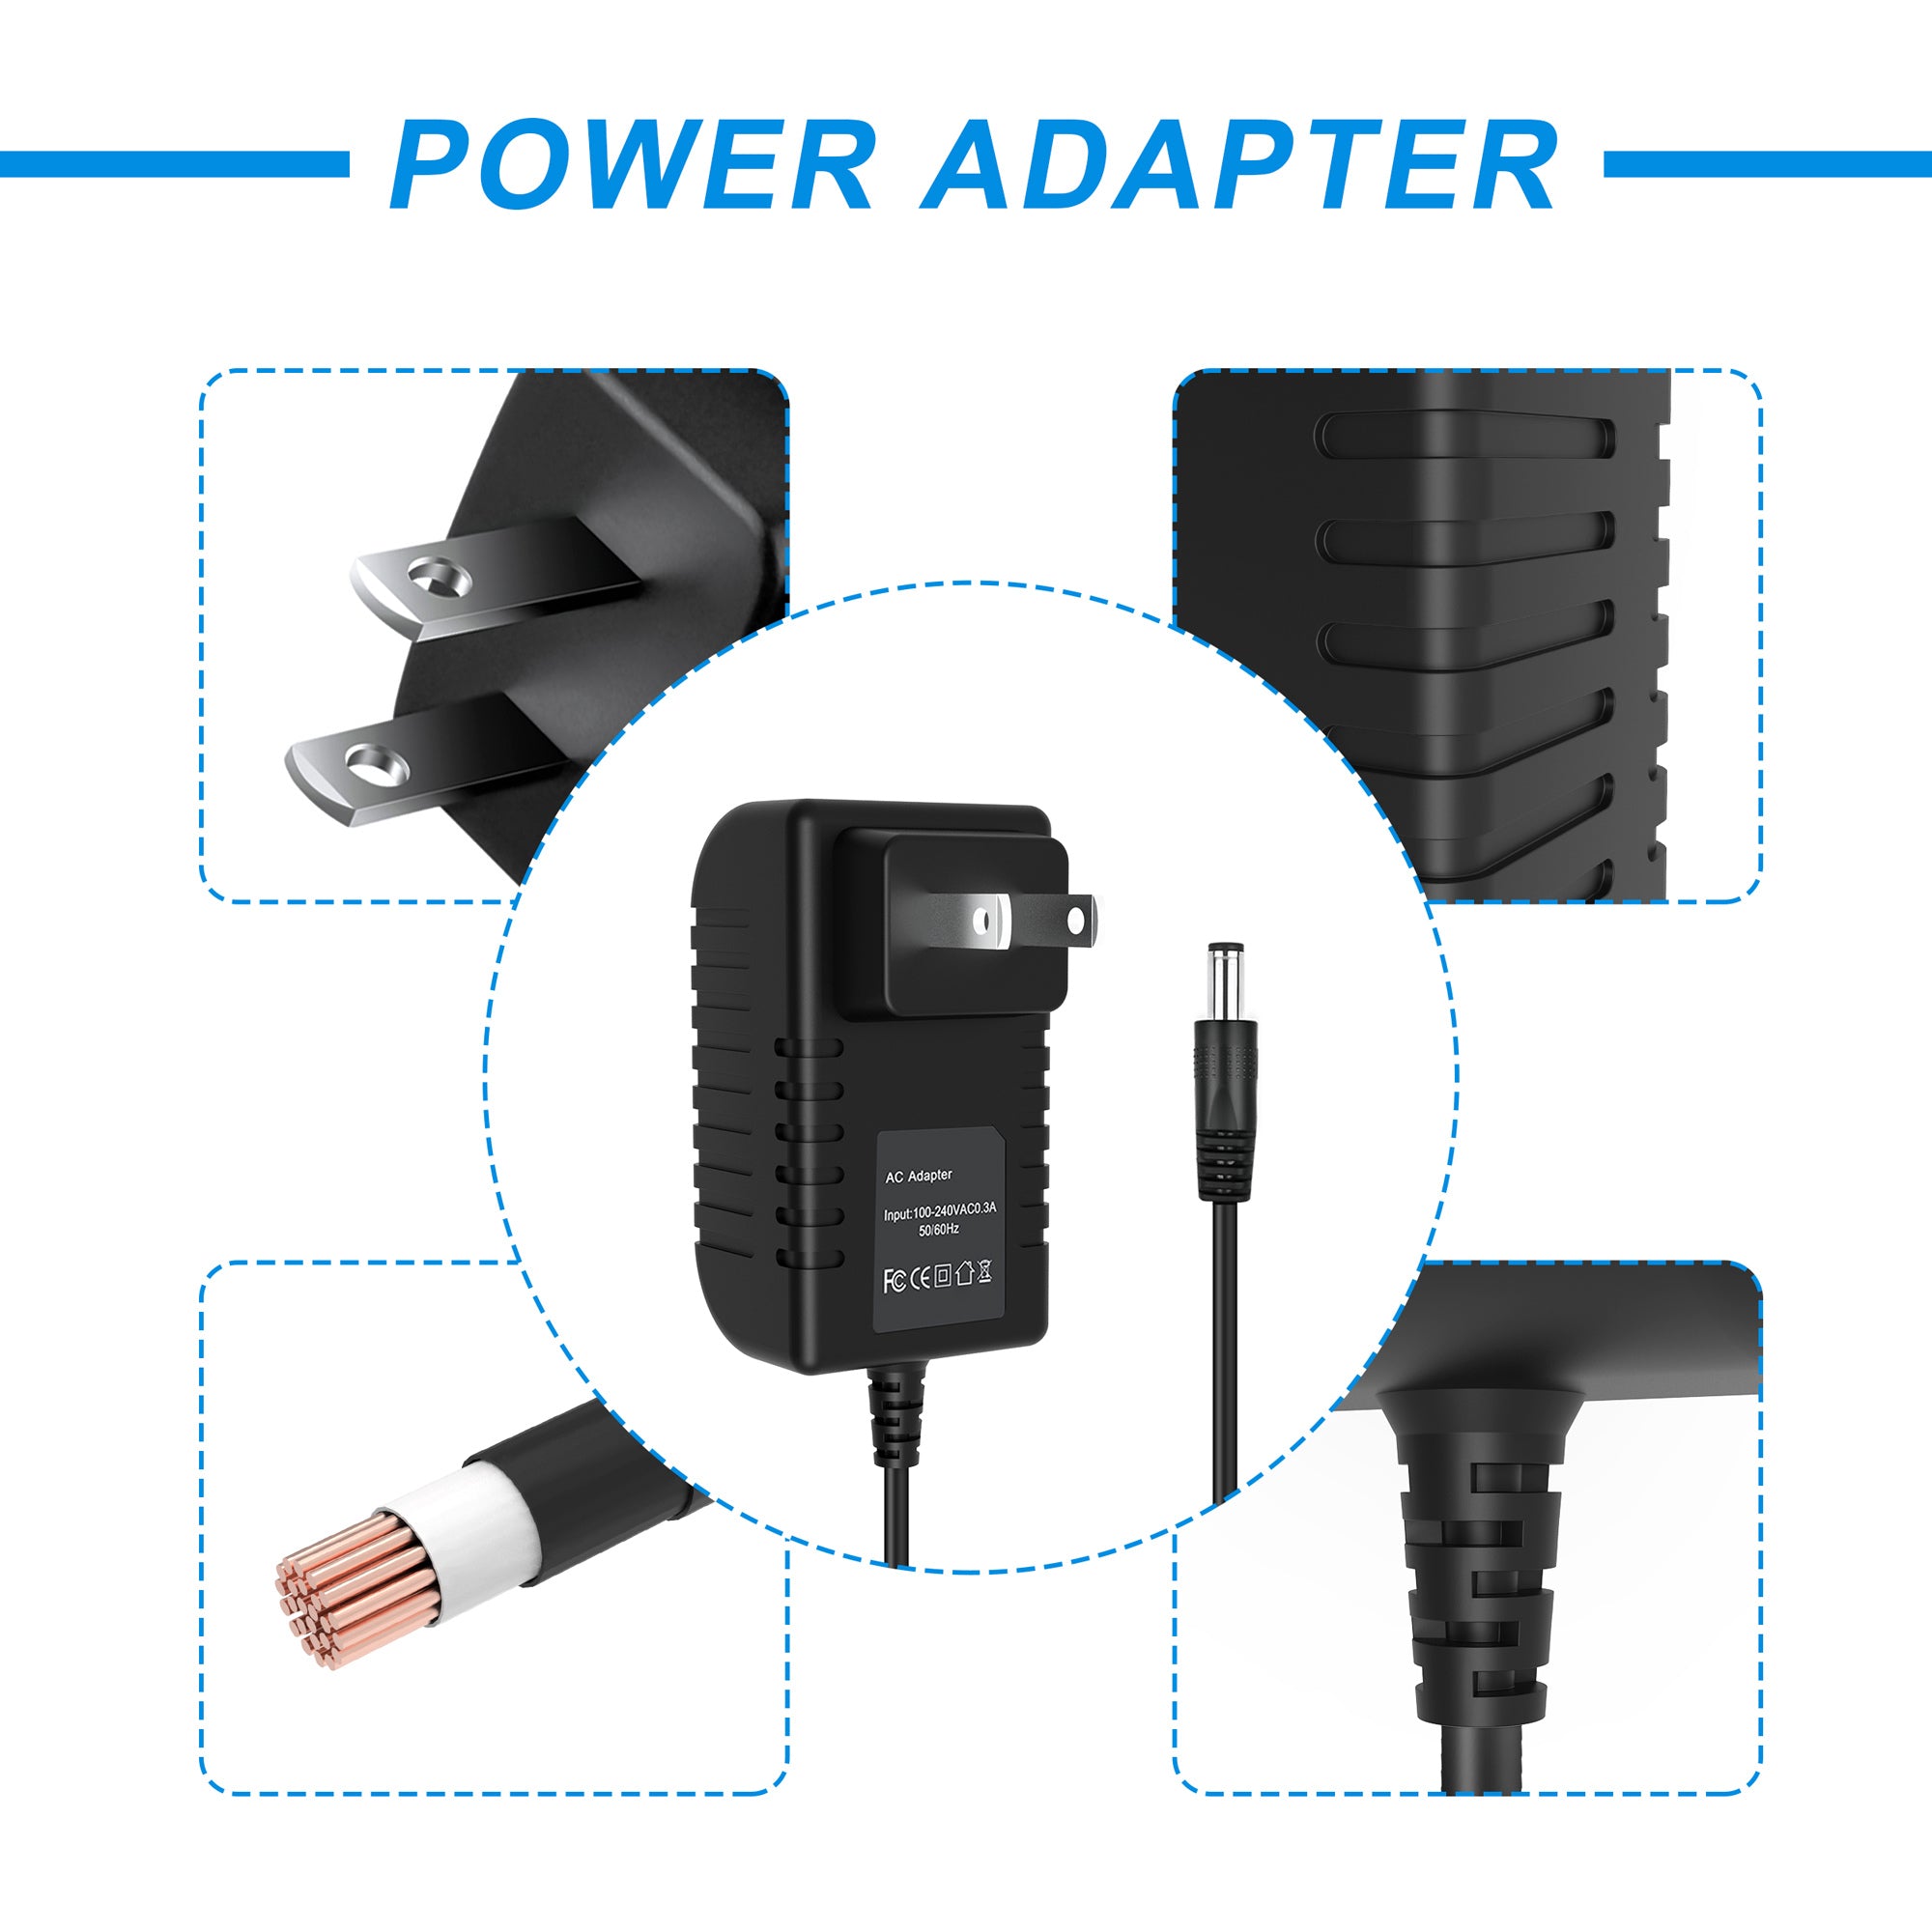 AbleGrid AC/DC Adapter Compatible with Realistic Concertmate 350 42-4008 200 42-4001 RadioShack Keyboard Input: 100 - 240 VAC 50/60Hz Worldwide Voltage Use PSU